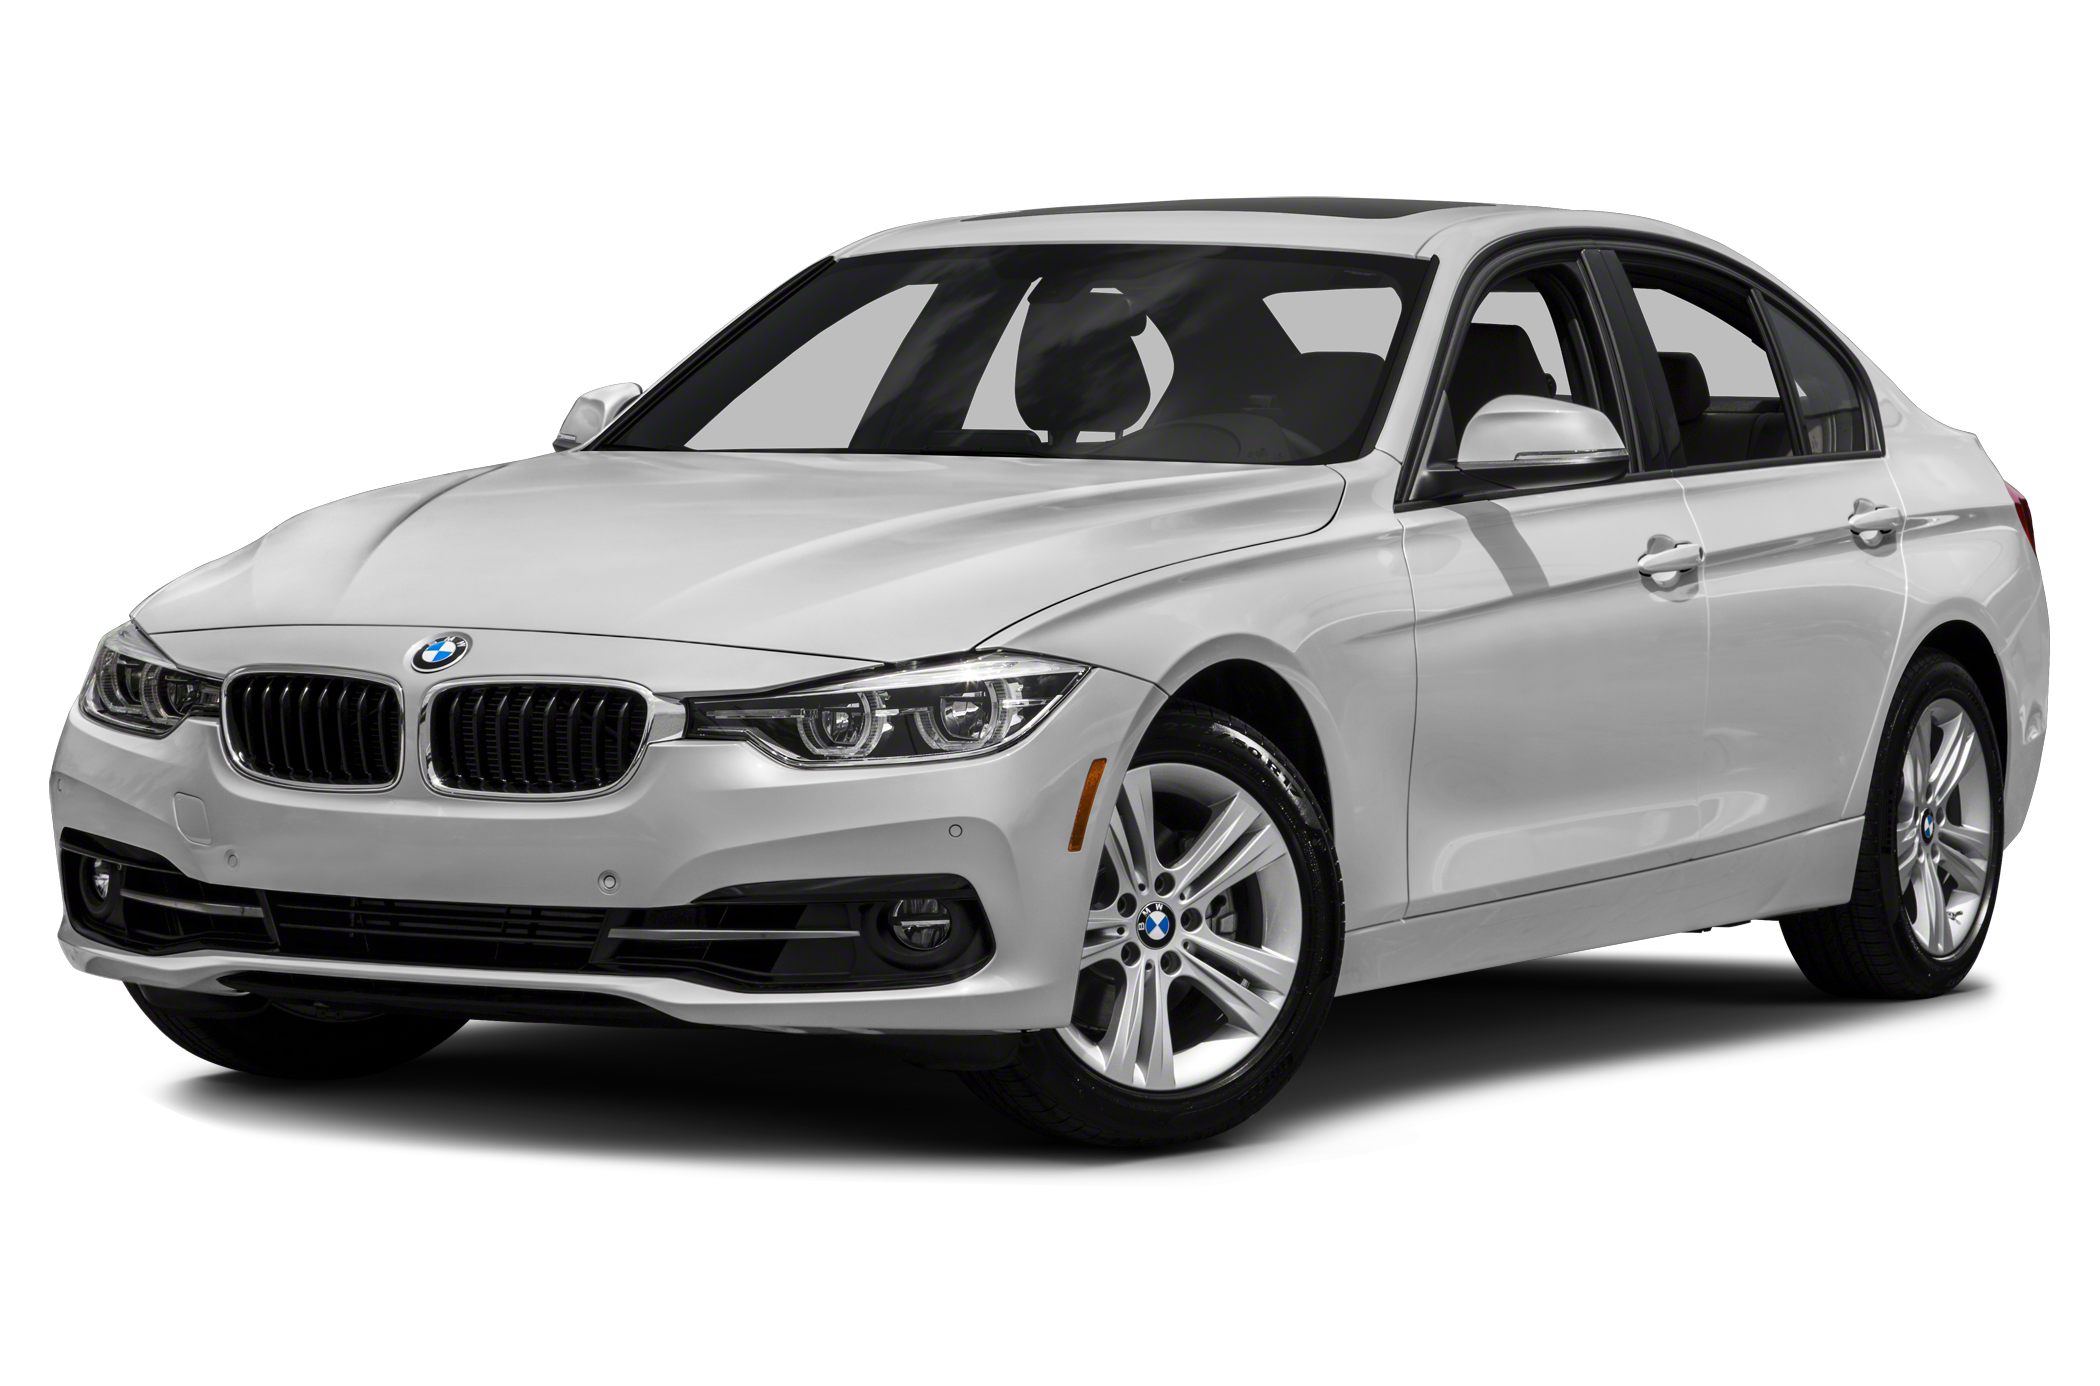  BMW 328I oem parts and accessories on sale